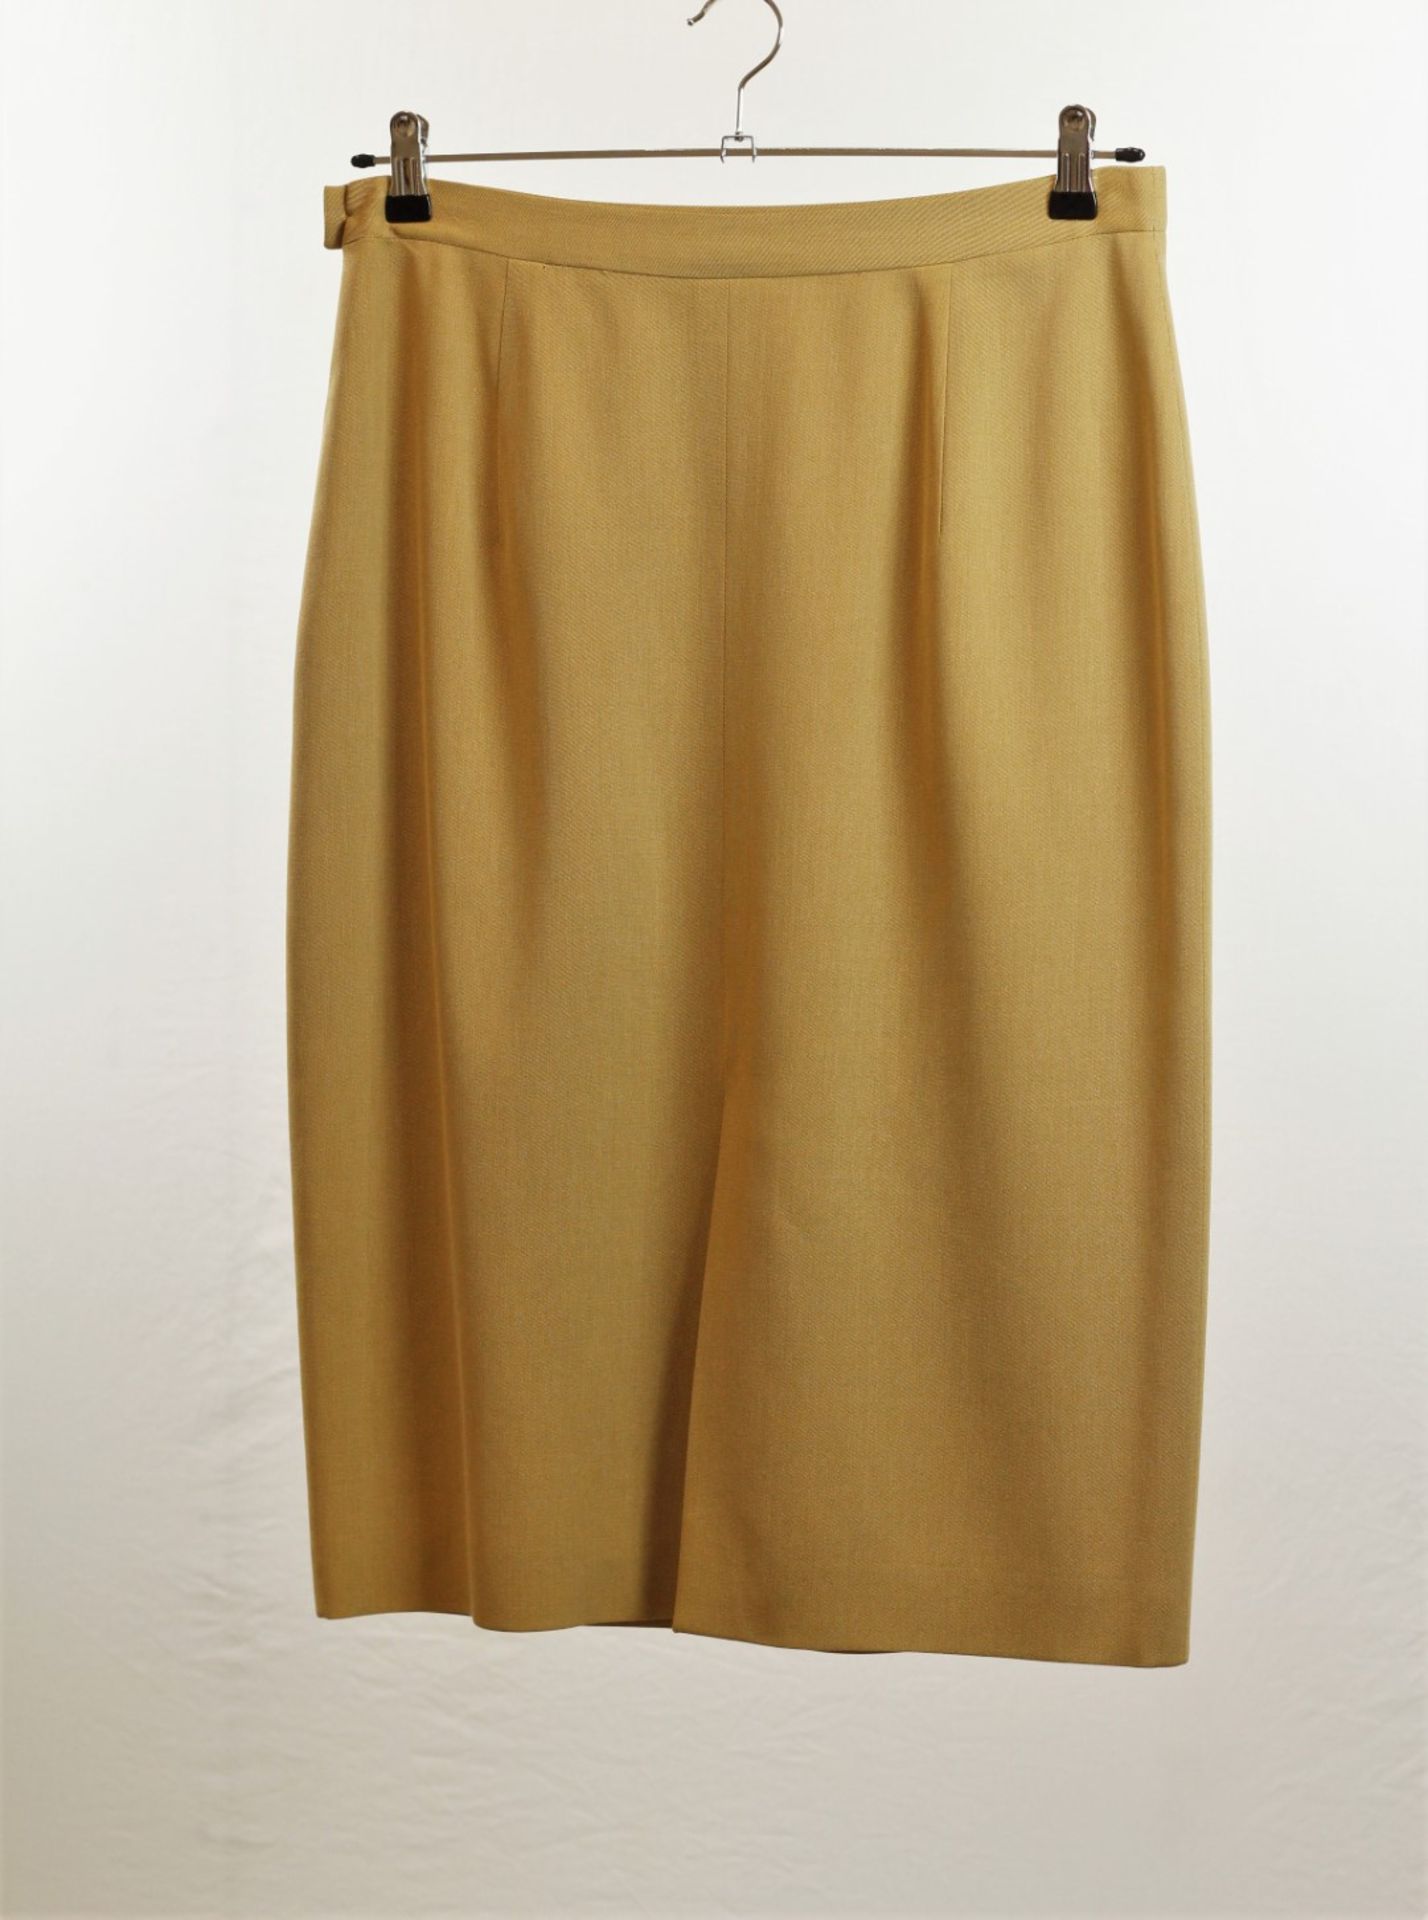 1 x Belvest Mustard Skirt - Size: 18 - Material: 75% Wool 25% Cotton. Lining 100% Rayon - From a - Image 2 of 7